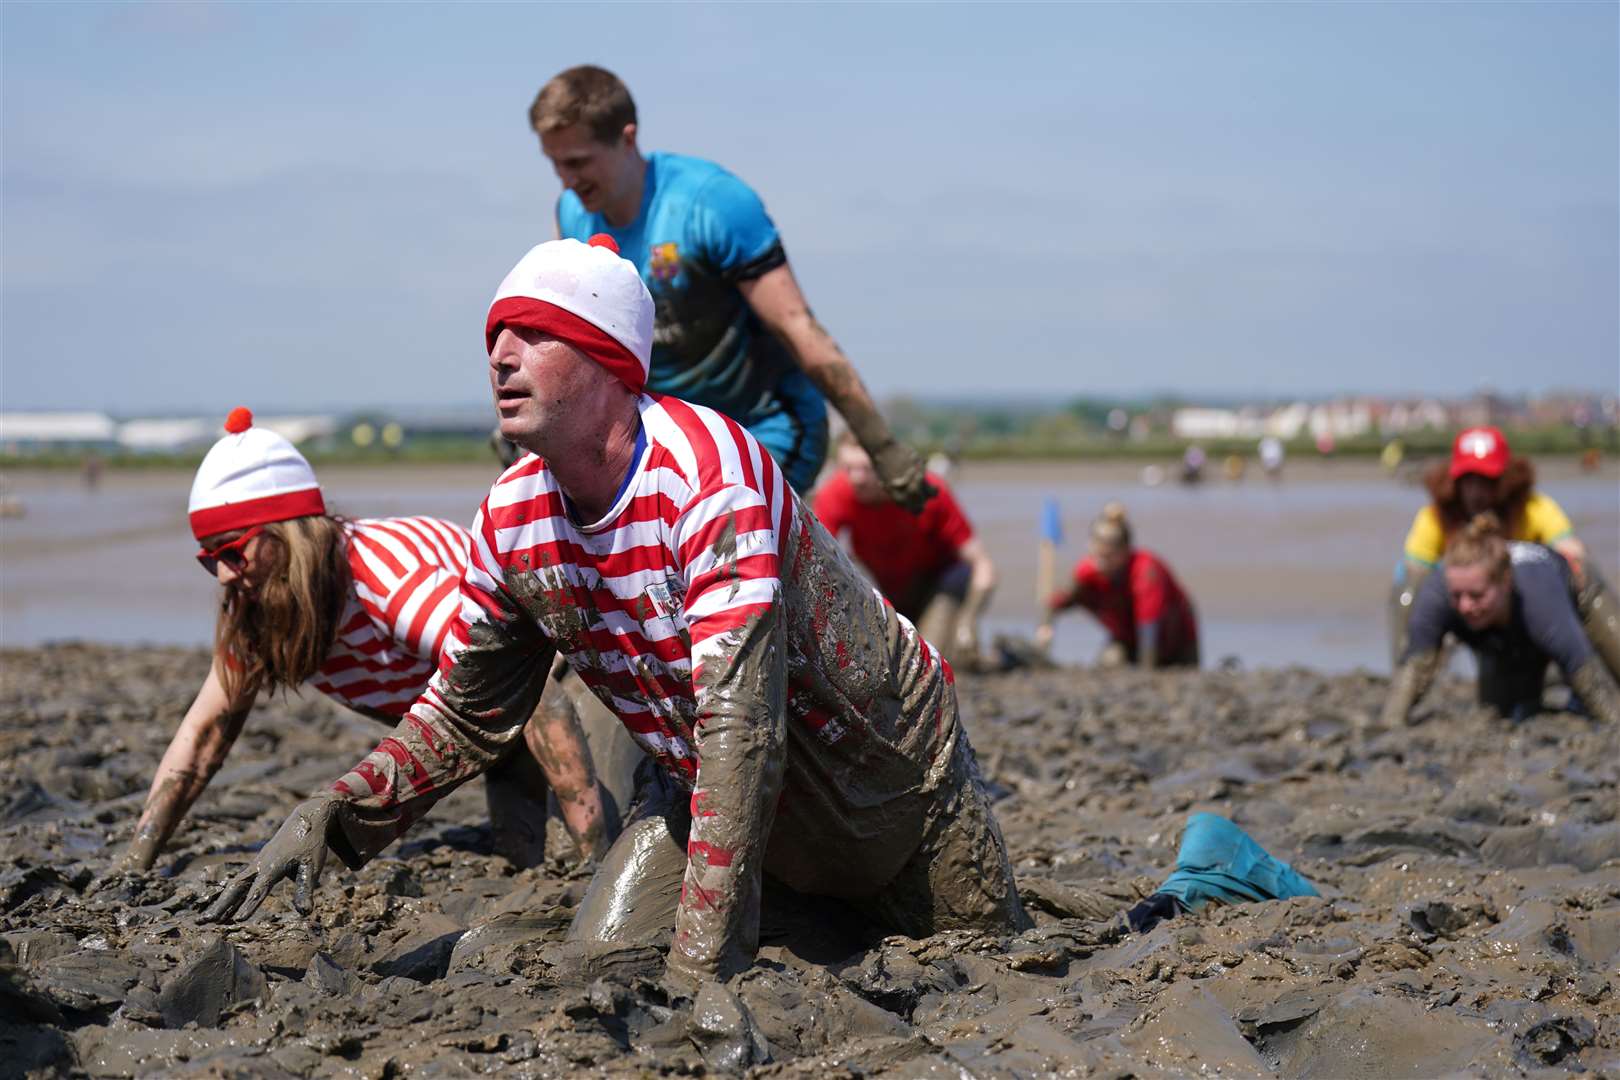 A woman and man, dressed as Wally from the Where’s Wally? books, take part in the annual Maldon Mud Race, a charity event to race across the bed of the River Blackwater in Essex, in May (PA)